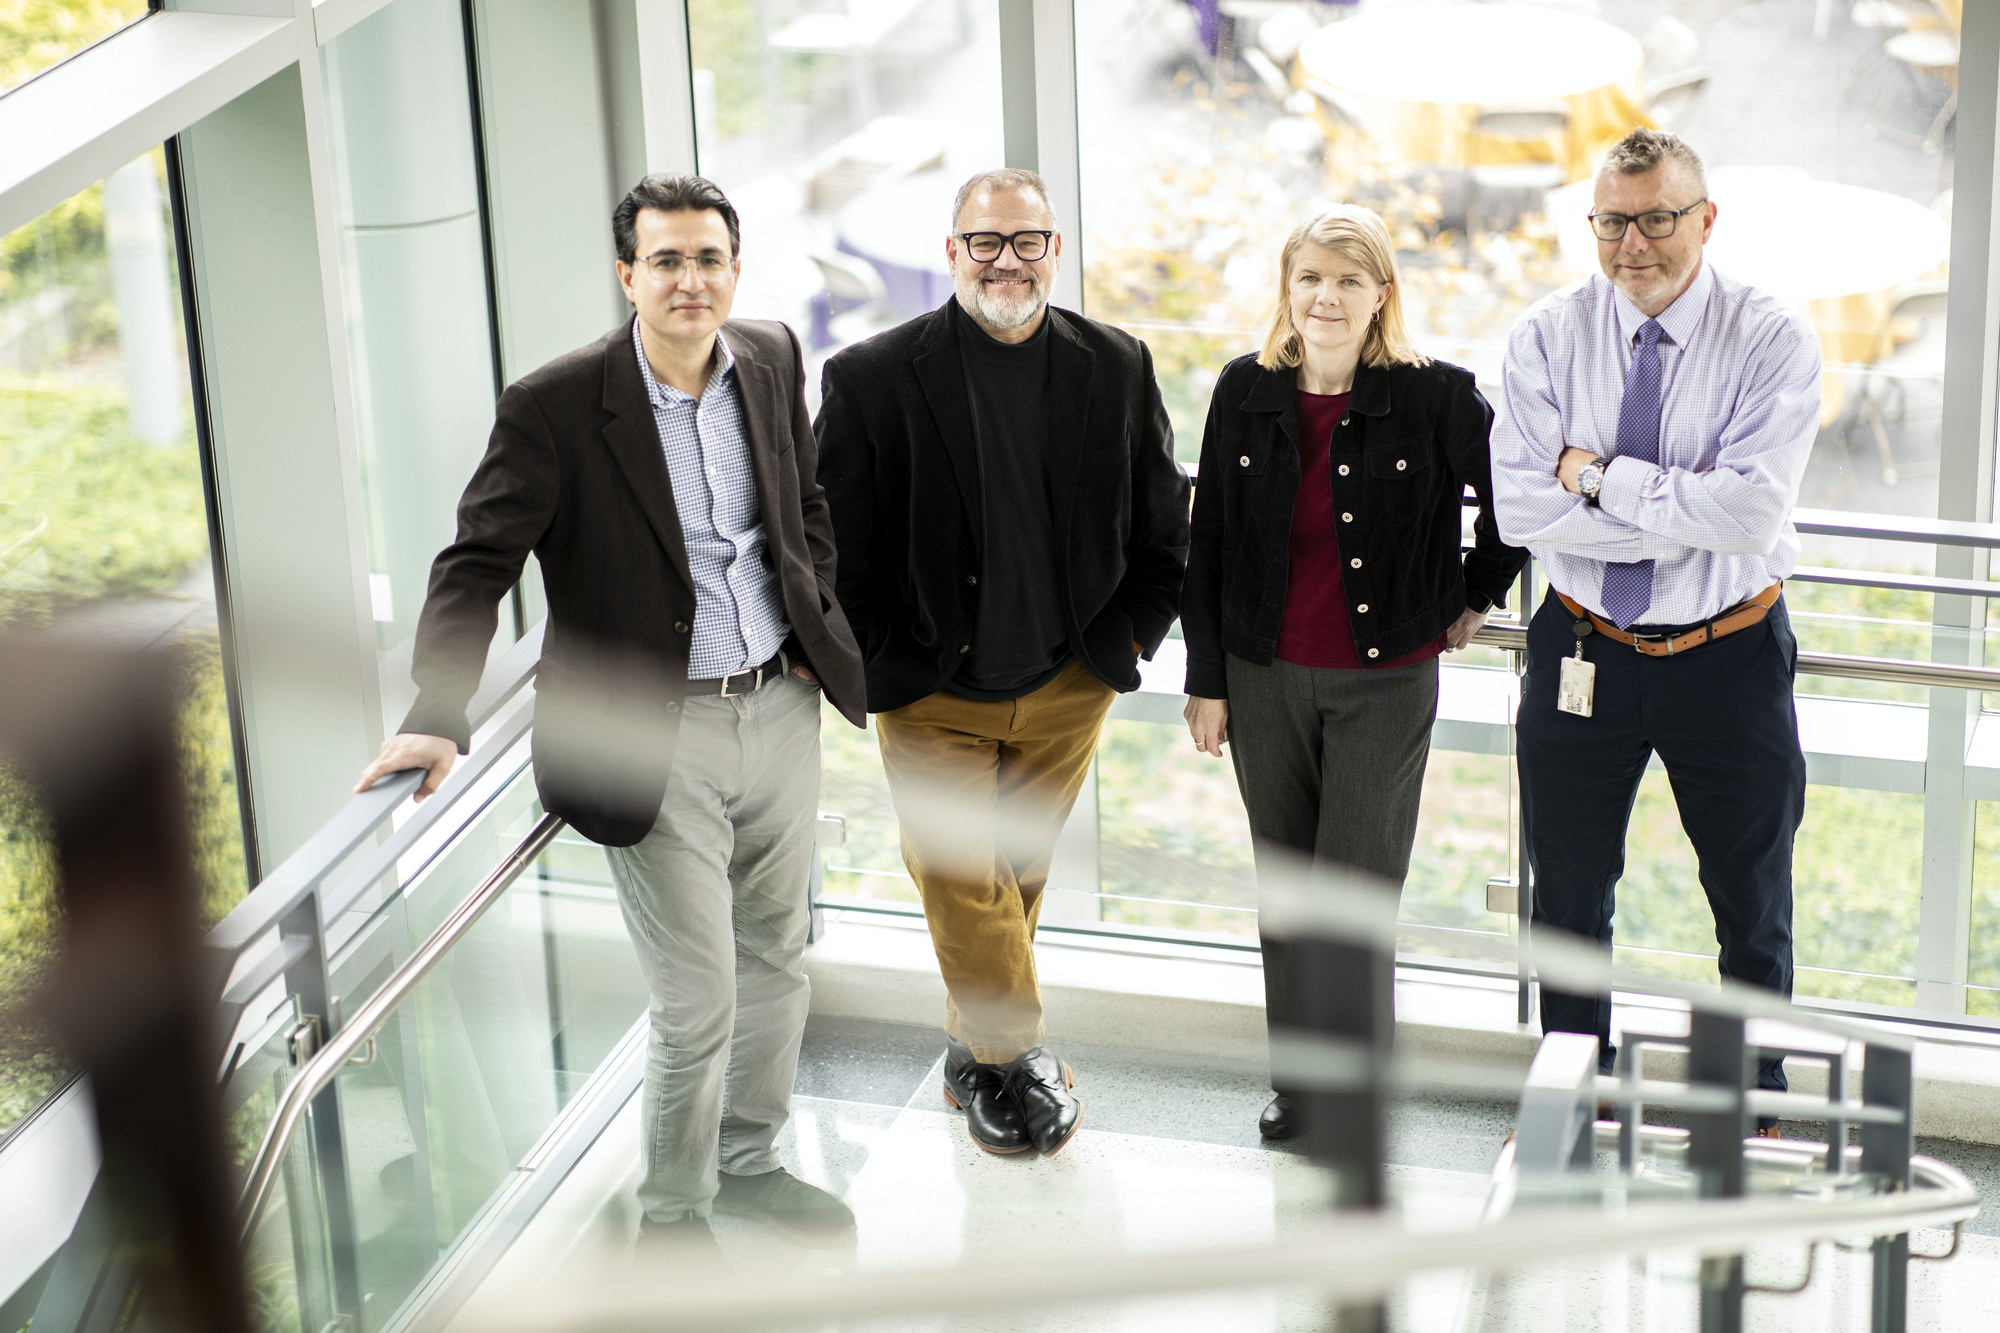 The four featured researchers stand in a light filled glass stairwell in the RNA Institute. From left to right: Mehmet Yigit (man wearing wire rimmed glasses, brown jacket and grey pants), Scott Tenenbaum (man with black glasses wearing black jacket with khaki pants), Melinda Larsen (woman with blond hair wearing a black jacket with gray pants), and Andre Melendez (man wearing black rimmed glasses, pale purple dress shirt and tie and black slacks.